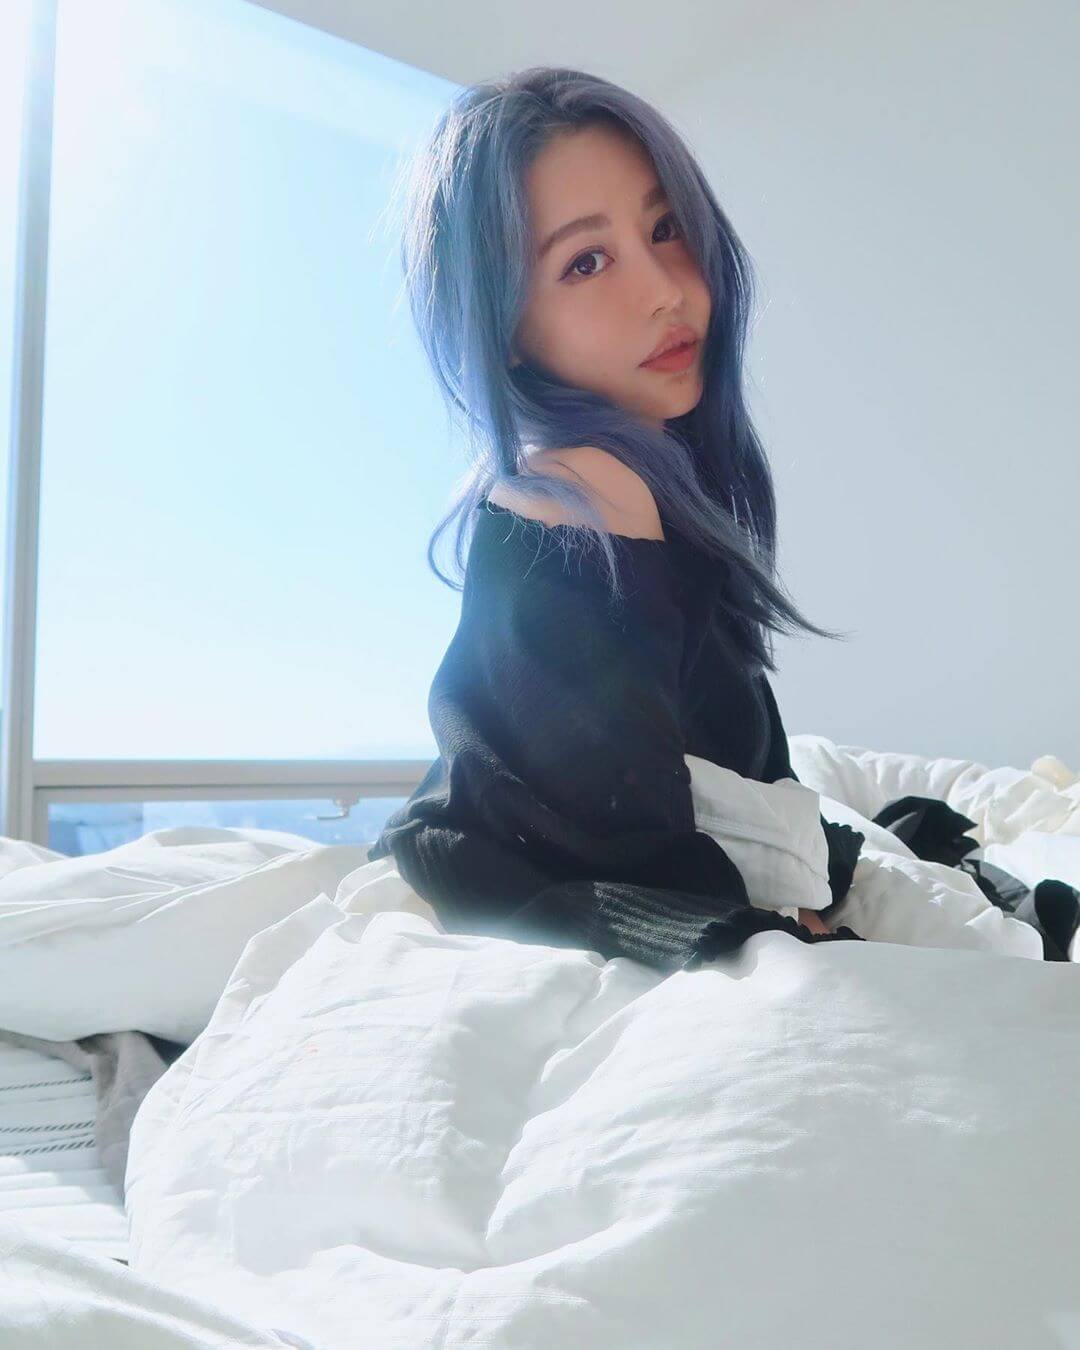 51 Hot Pictures Of Wengie Are A Genuine Masterpiece 16